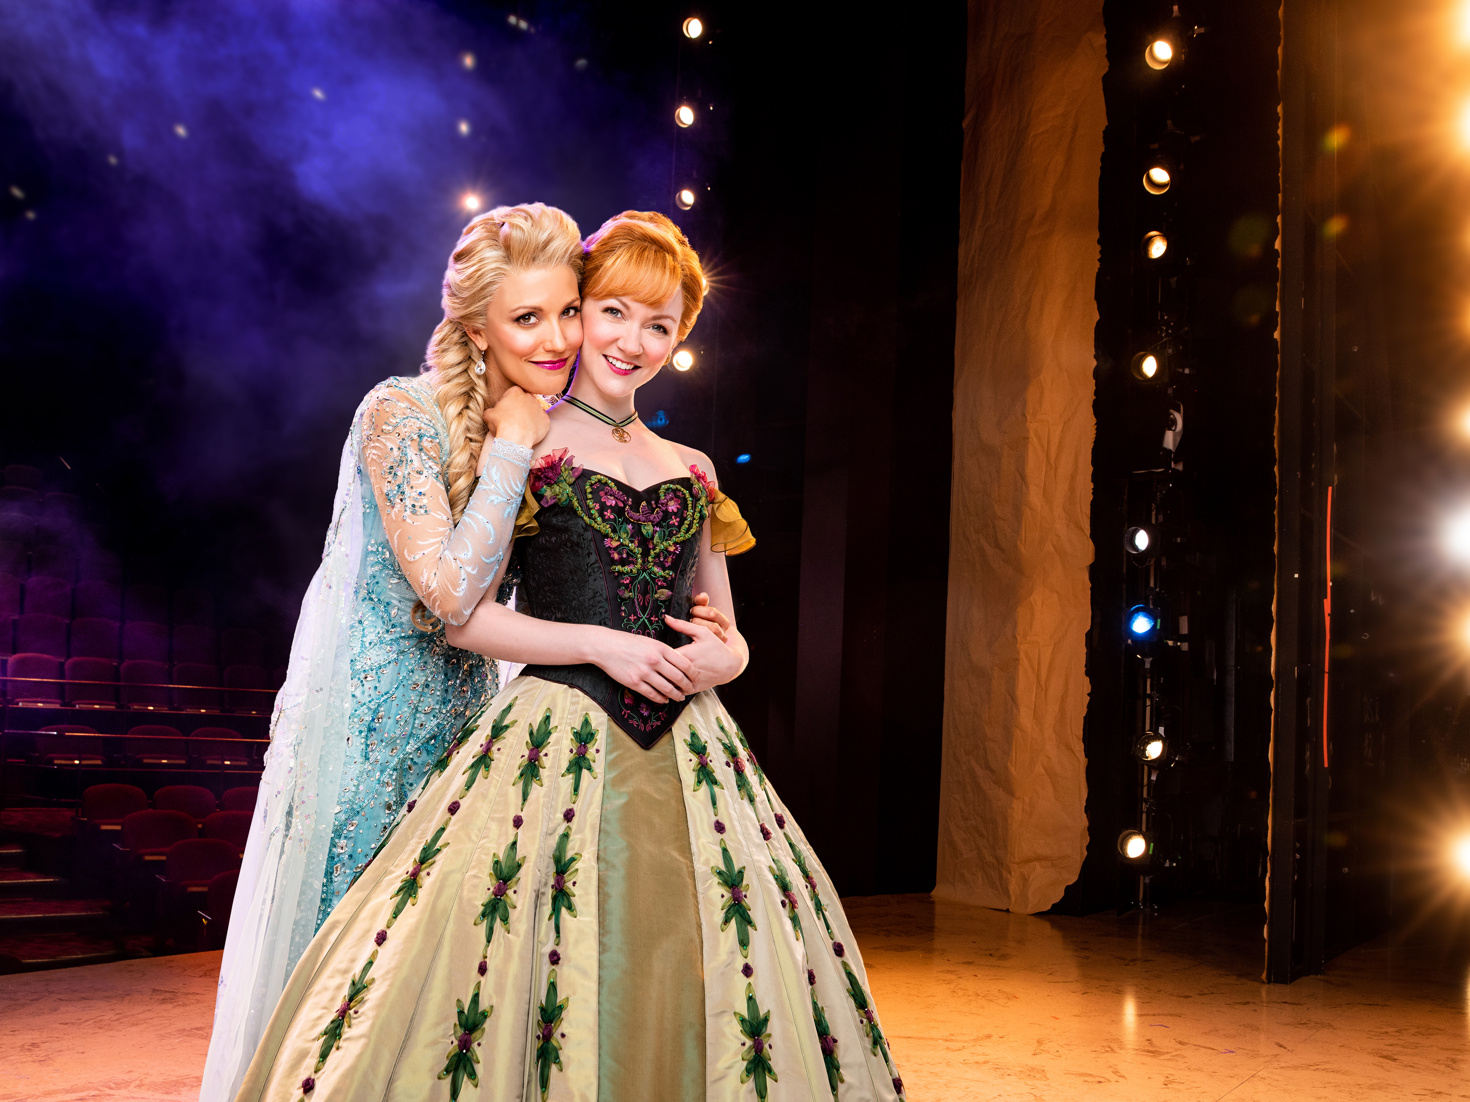 Disney S Frozen Tour Features A Brand New Elsa And Anna Song Called I Can T Lose You Broadway